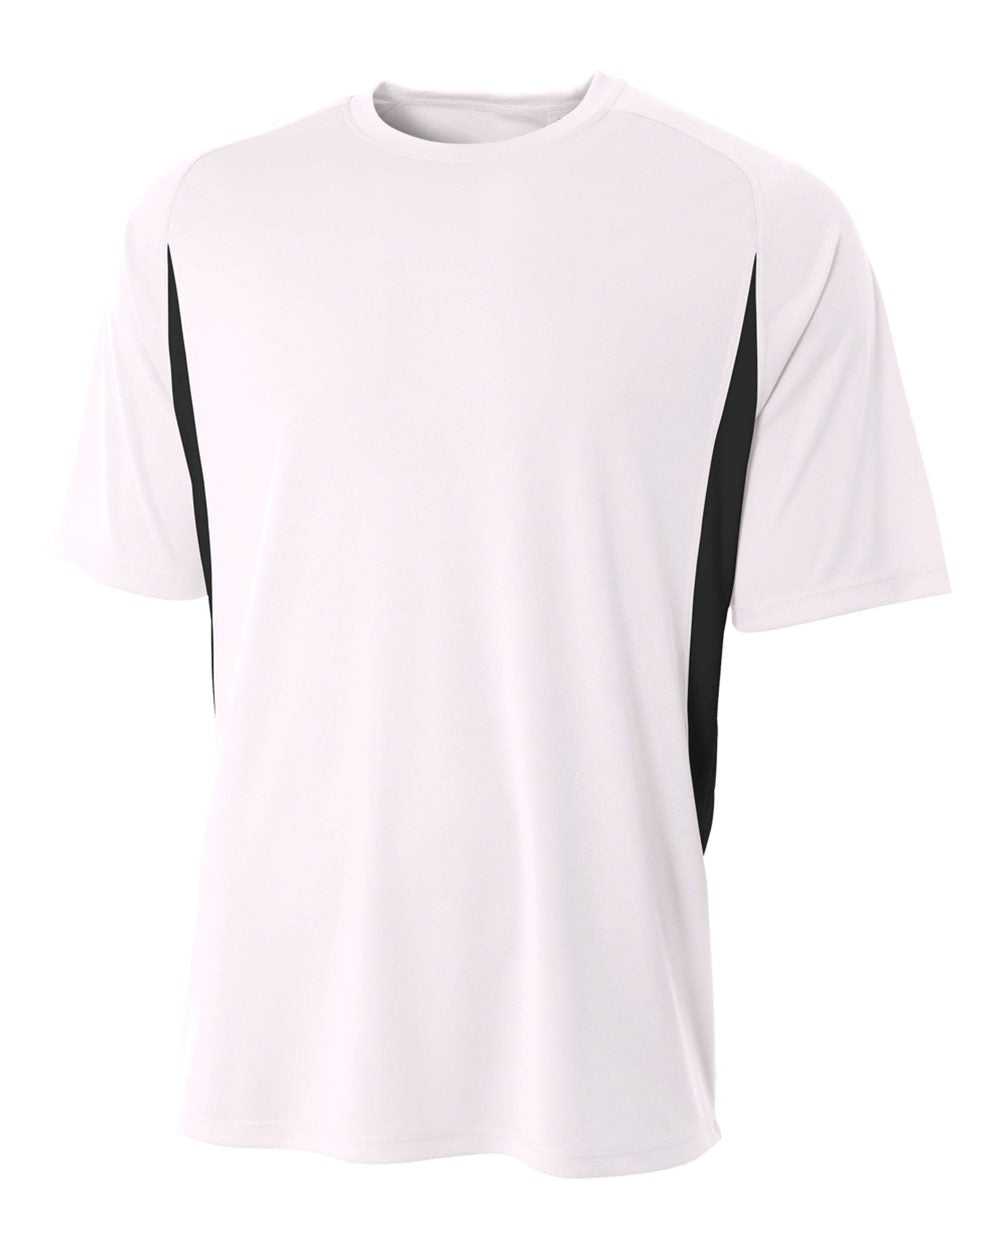 A4 NB3181 Youth Cooling Performance Color Block Short Sleeve Crew - White Black - HIT a Double